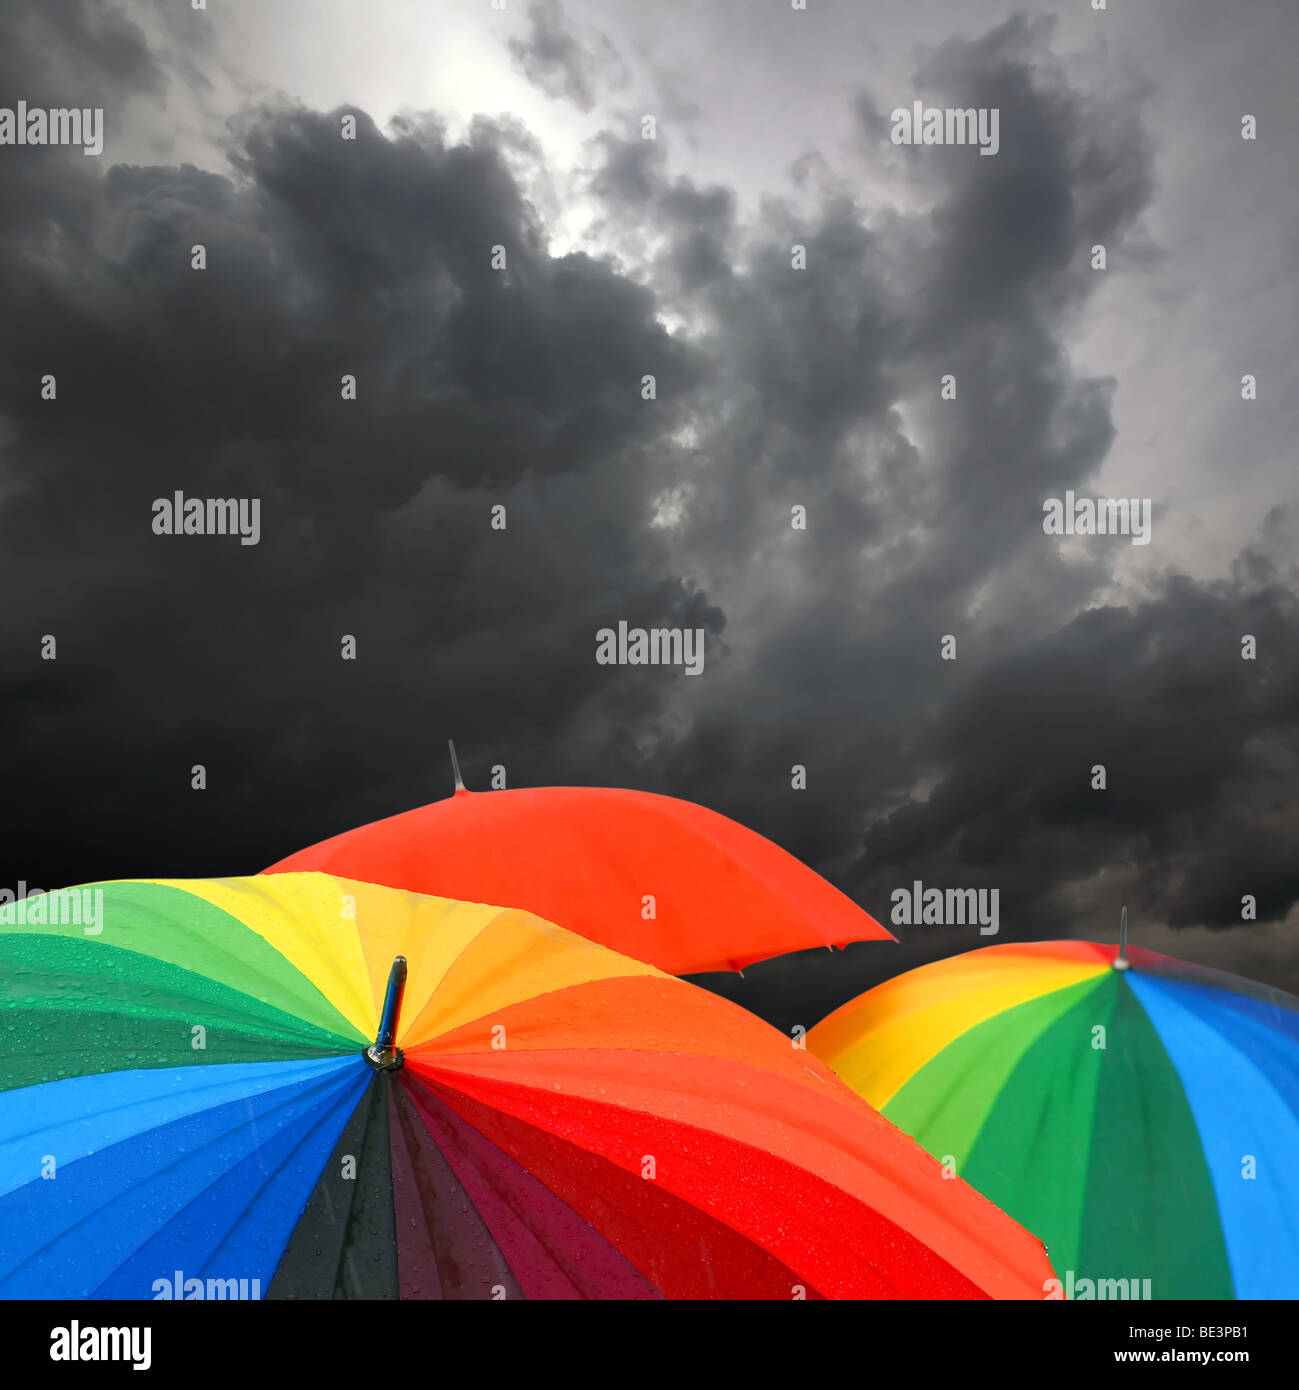 Rainbow colored umbrellas and dark cloudy sky in autumn time Stock Photo